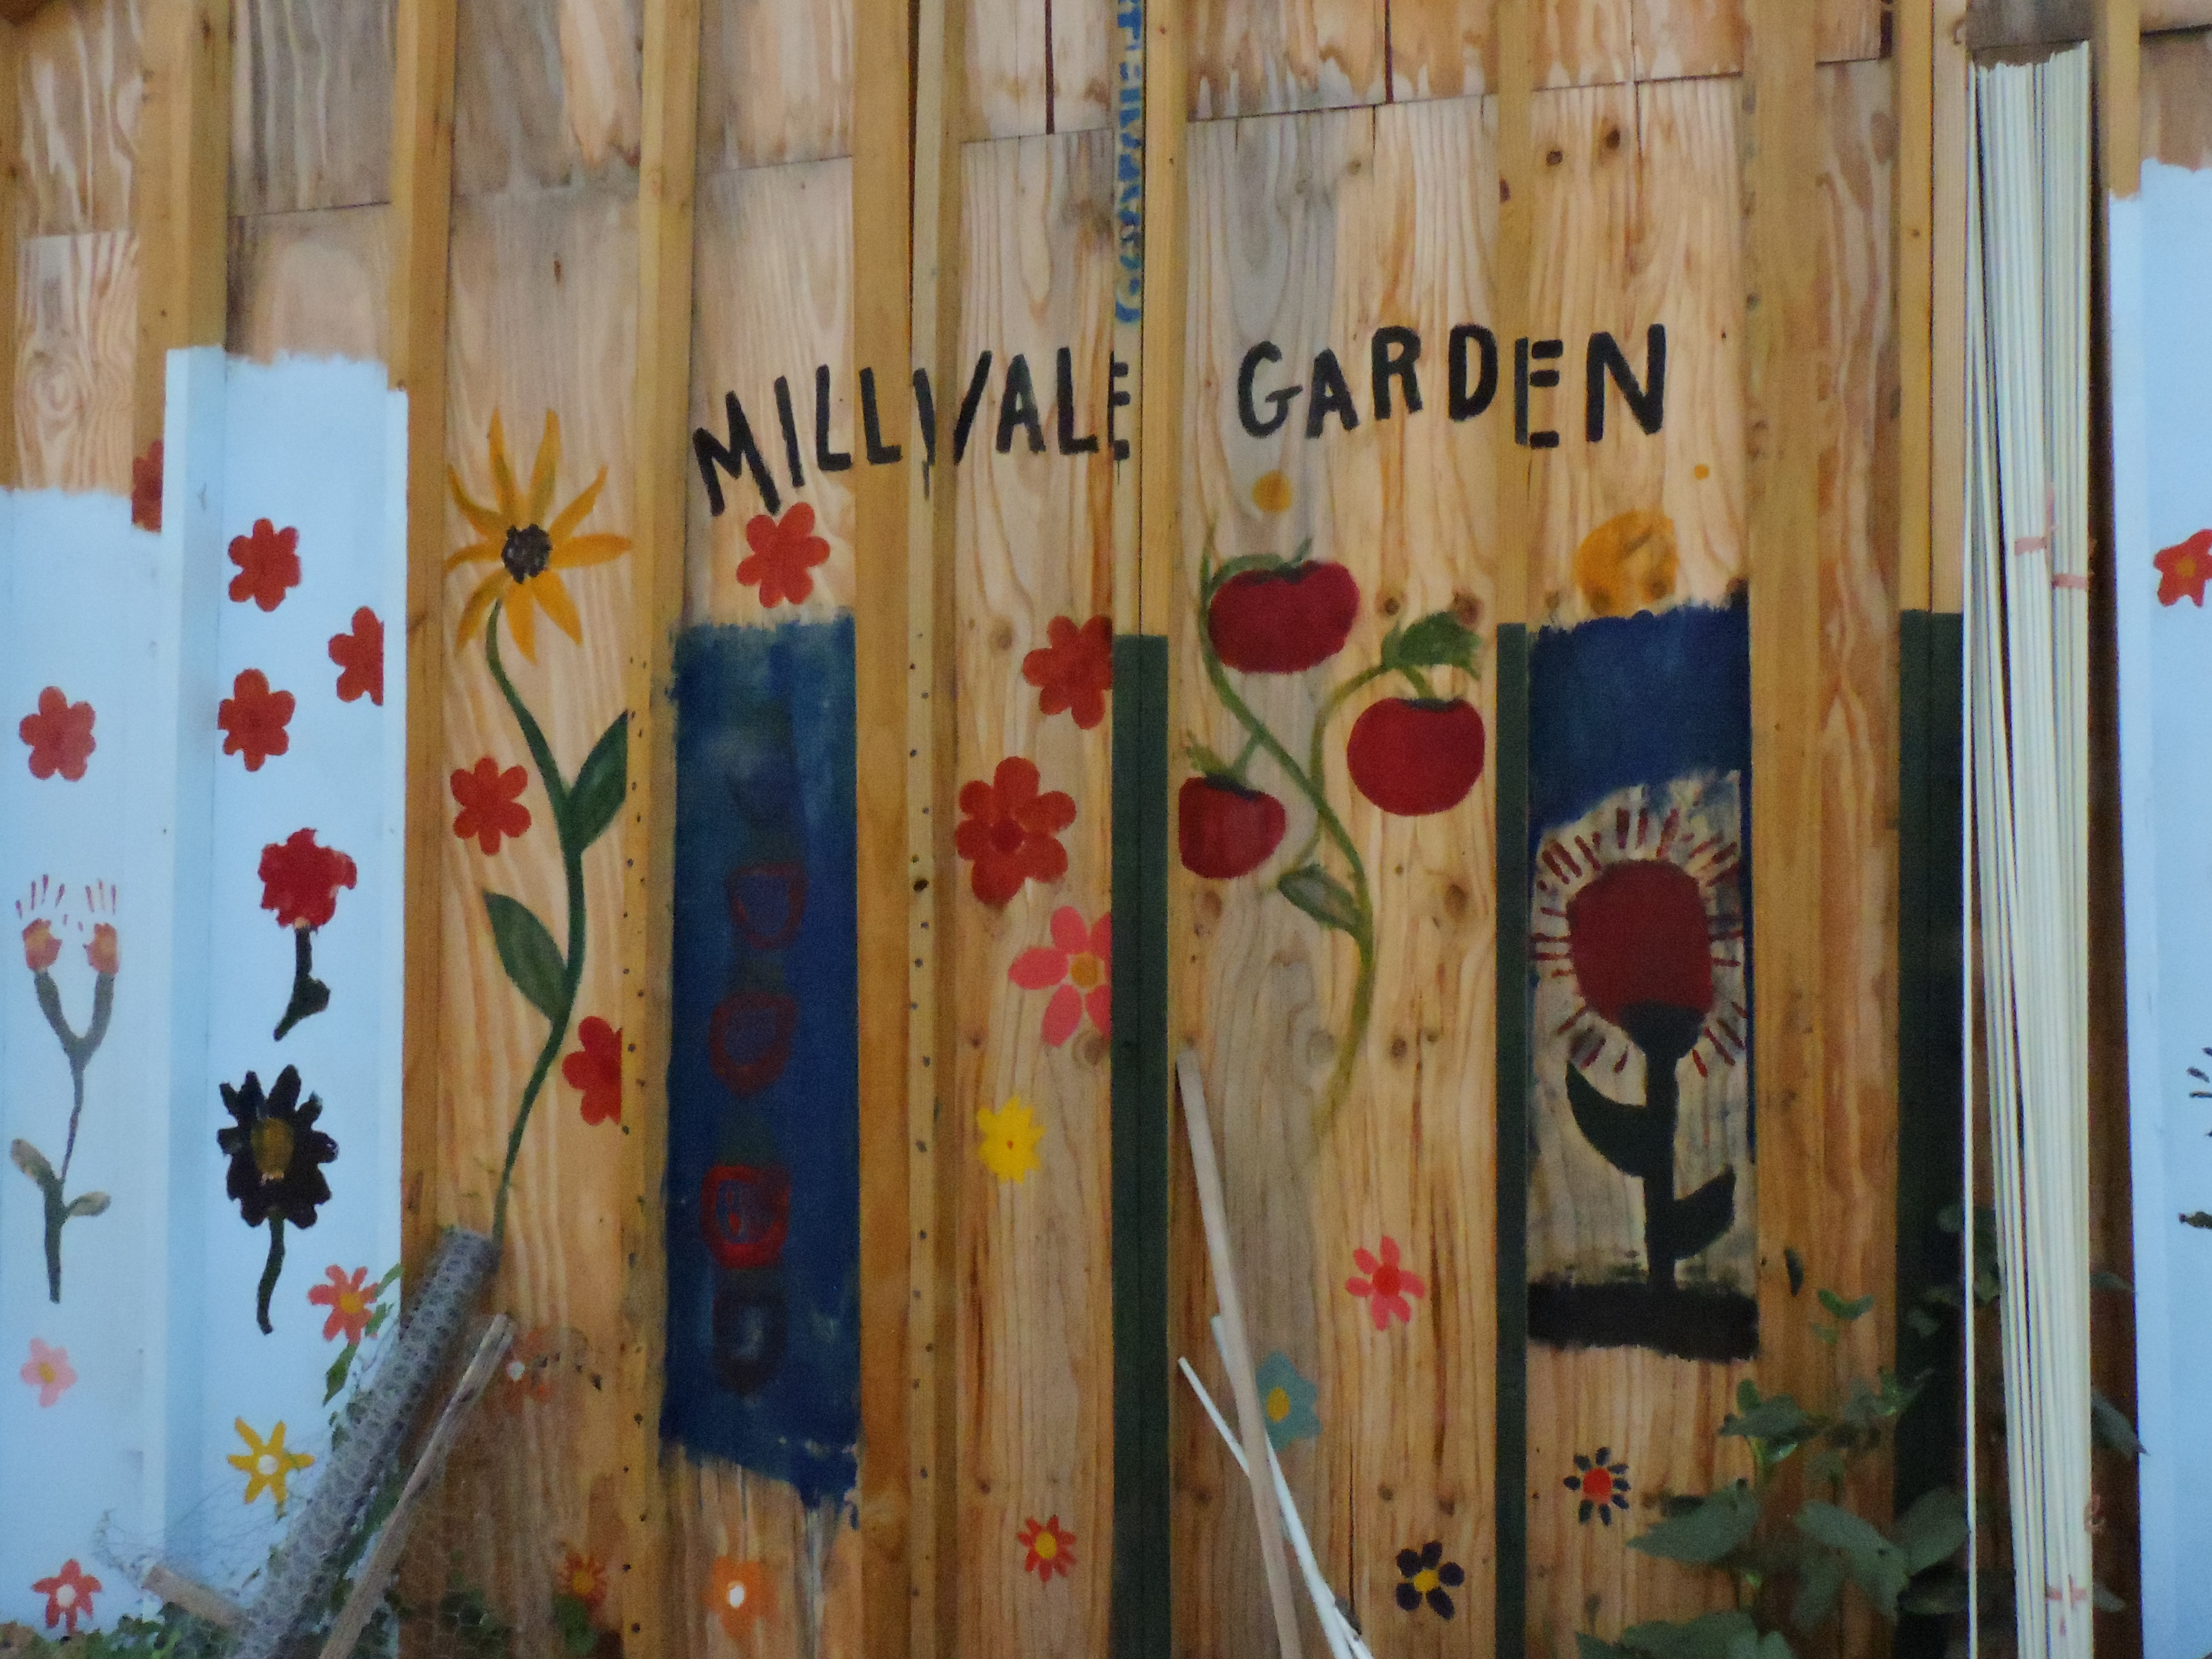 Our Catalytic Grants At Work On The Ground: Gardens of Millvale